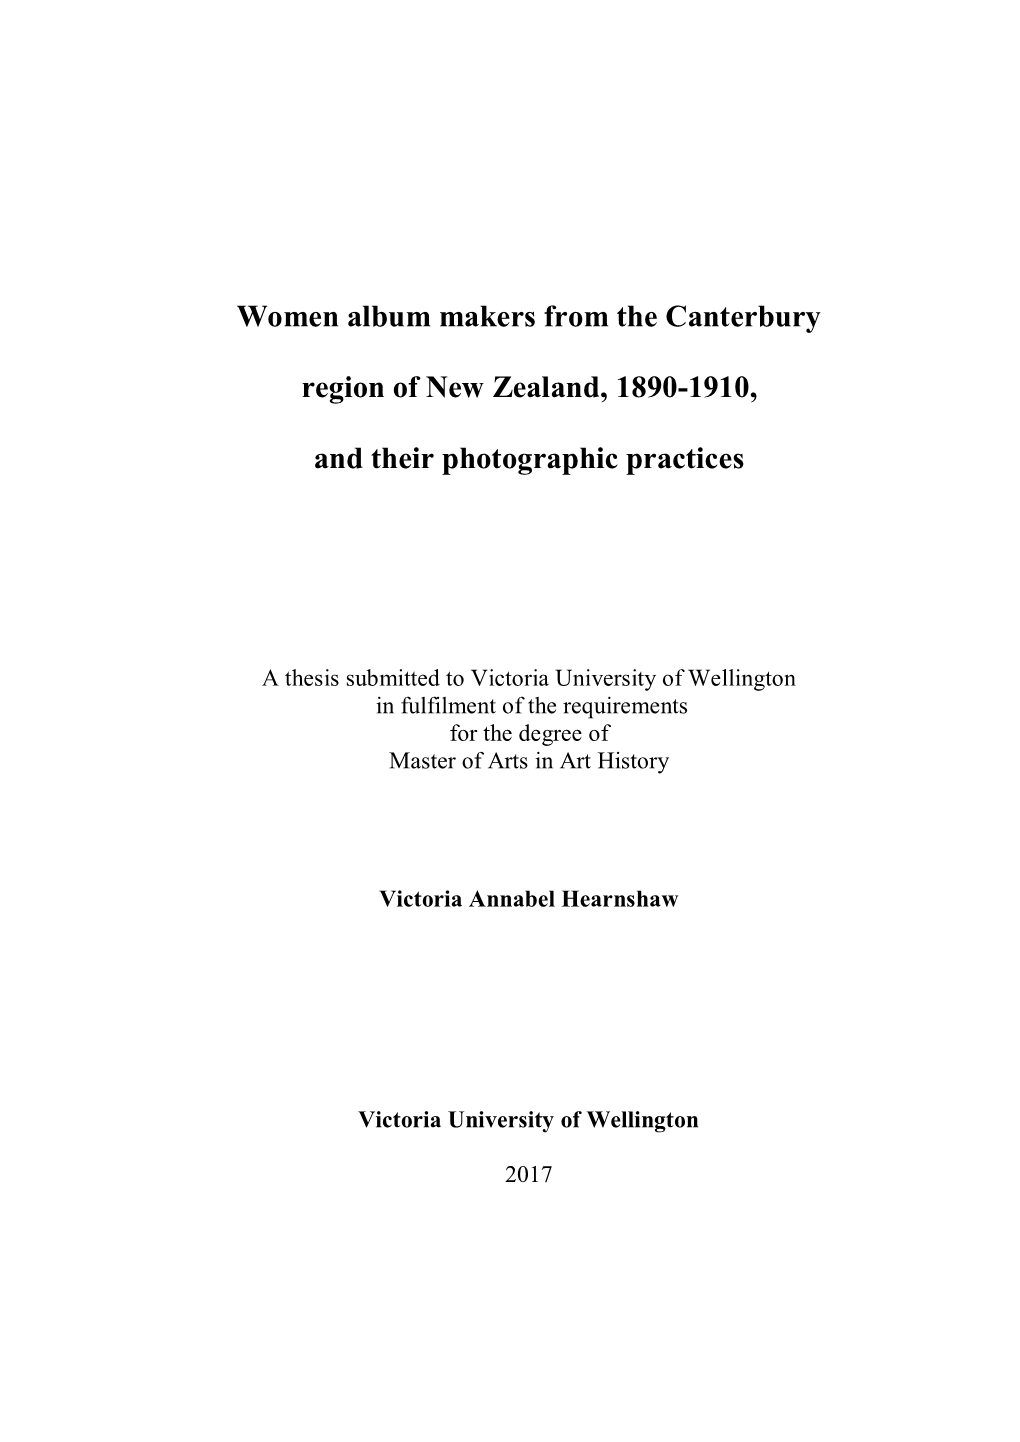 Women Album Makers from the Canterbury Region of New Zealand